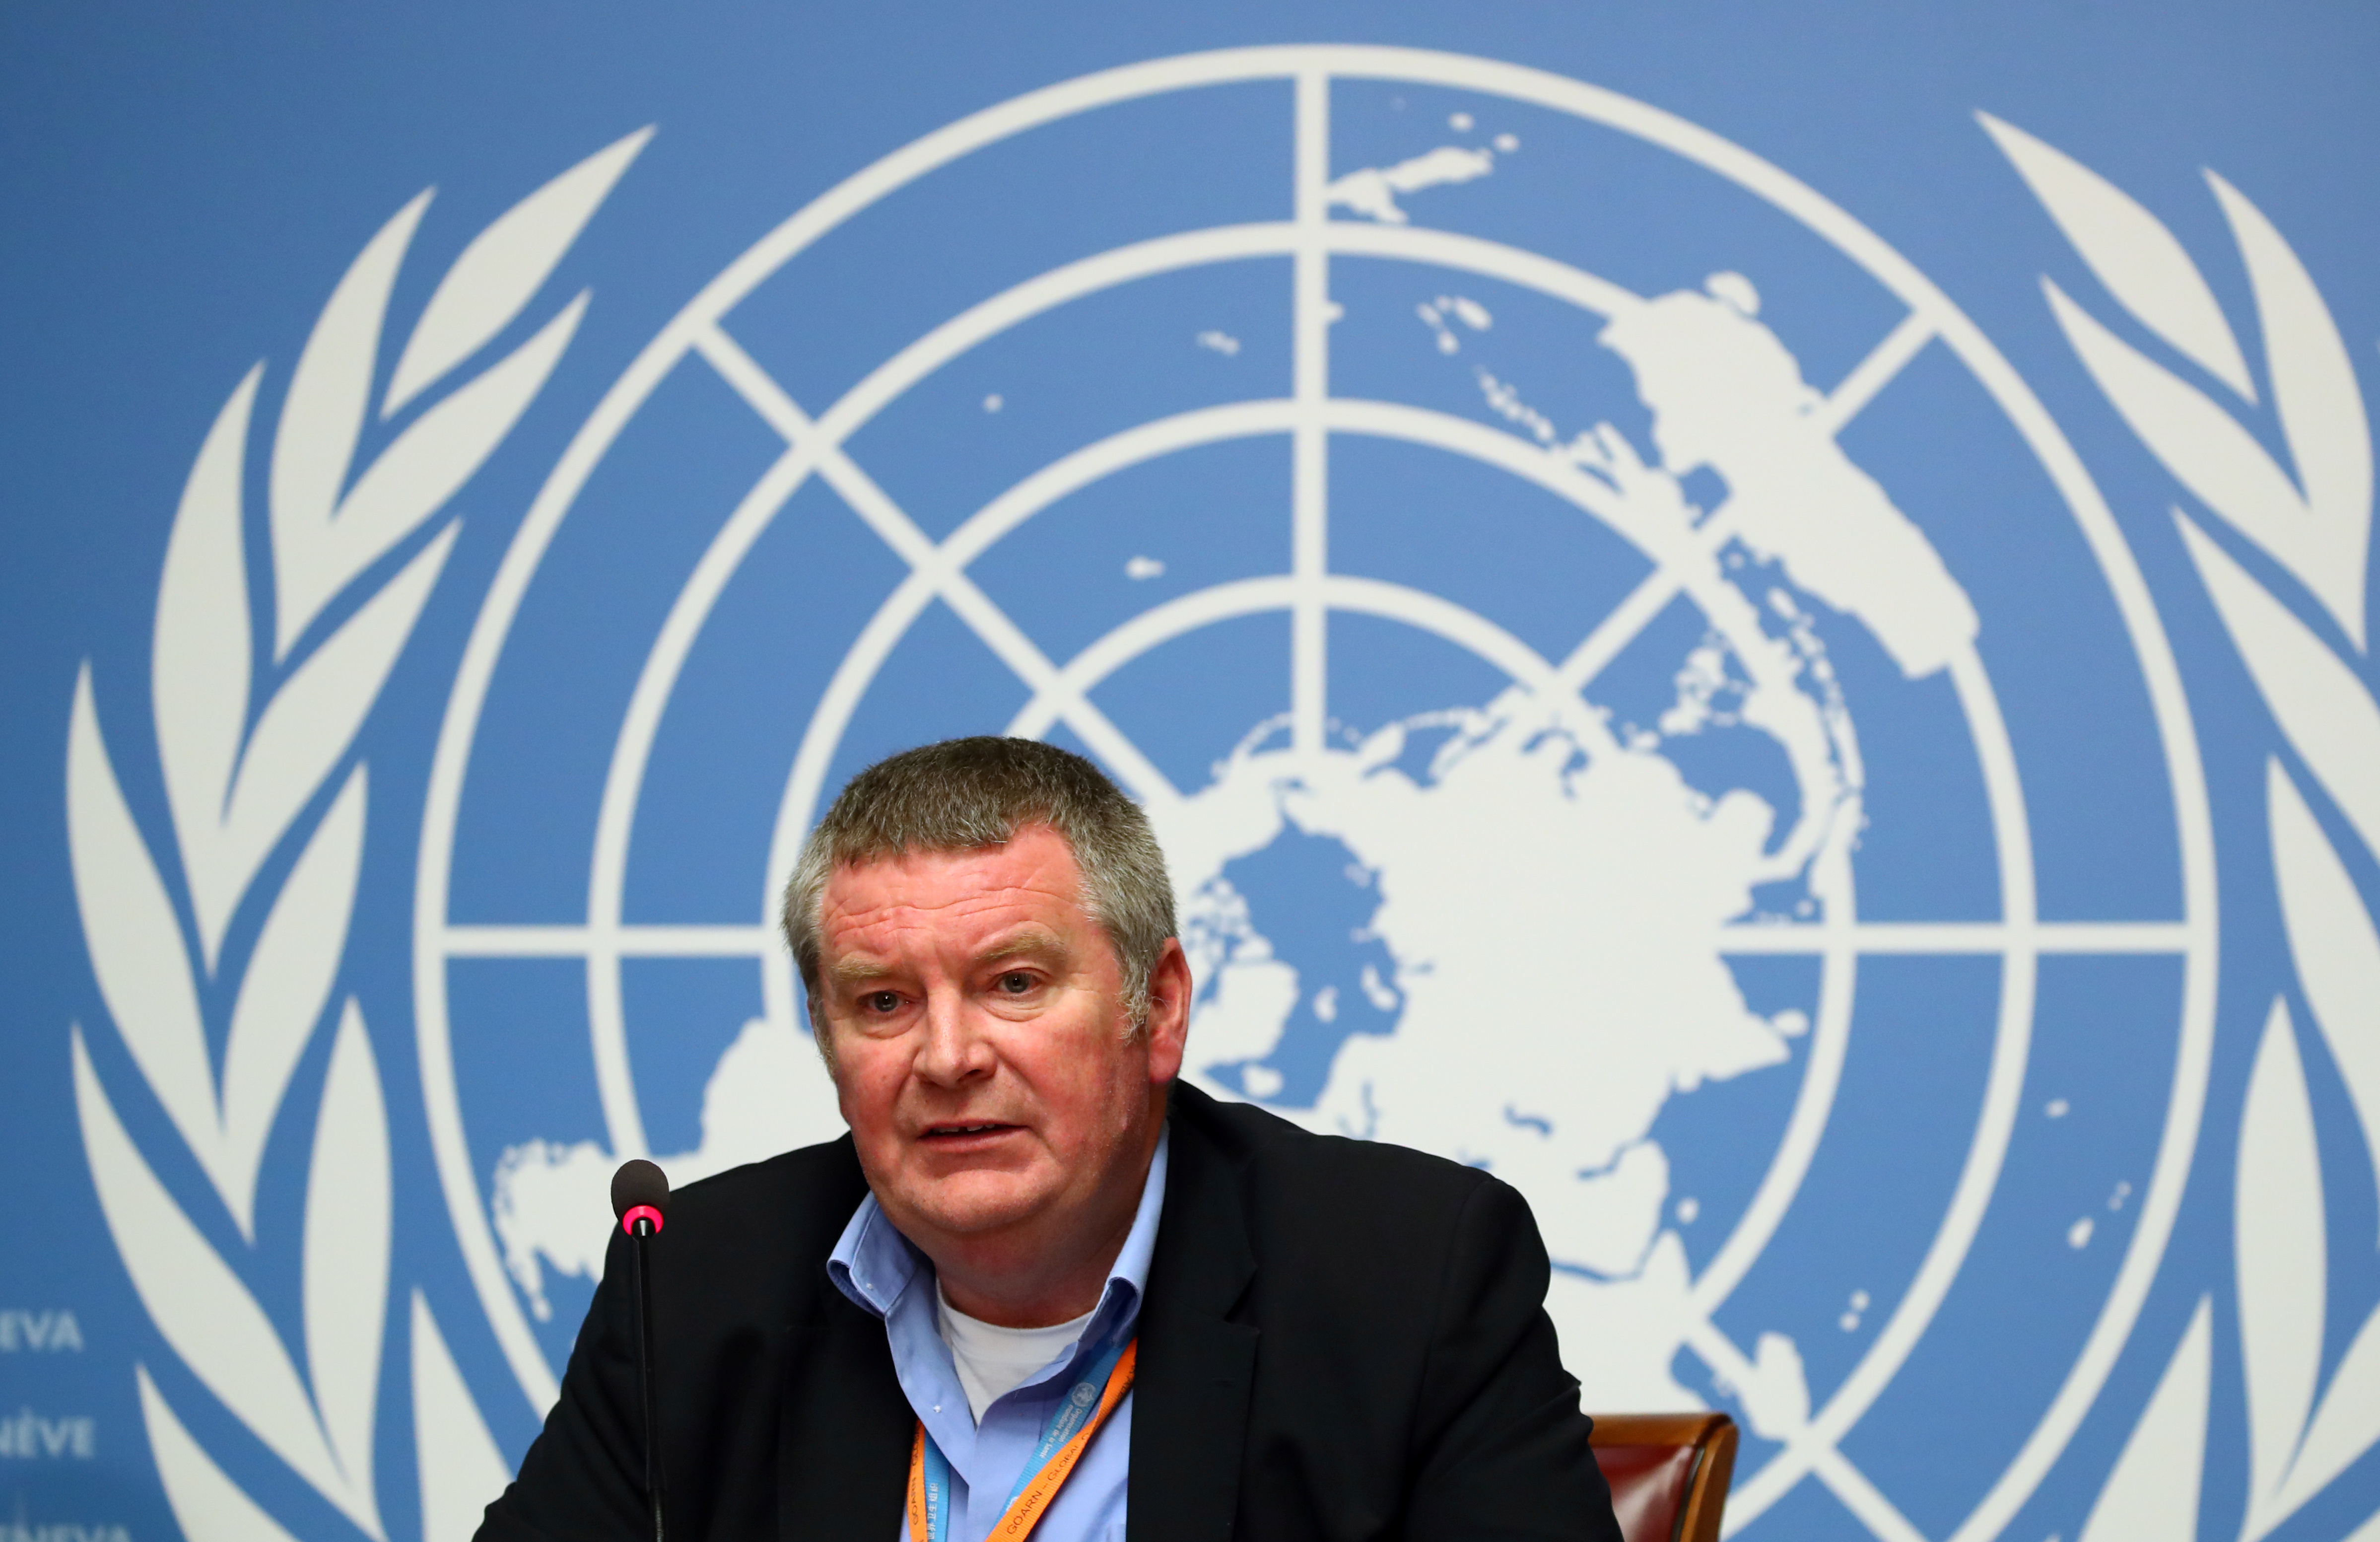 Ryan, Executive Director of the WHO attends a news conference on the Ebola outbreak at the United Nations in Geneva